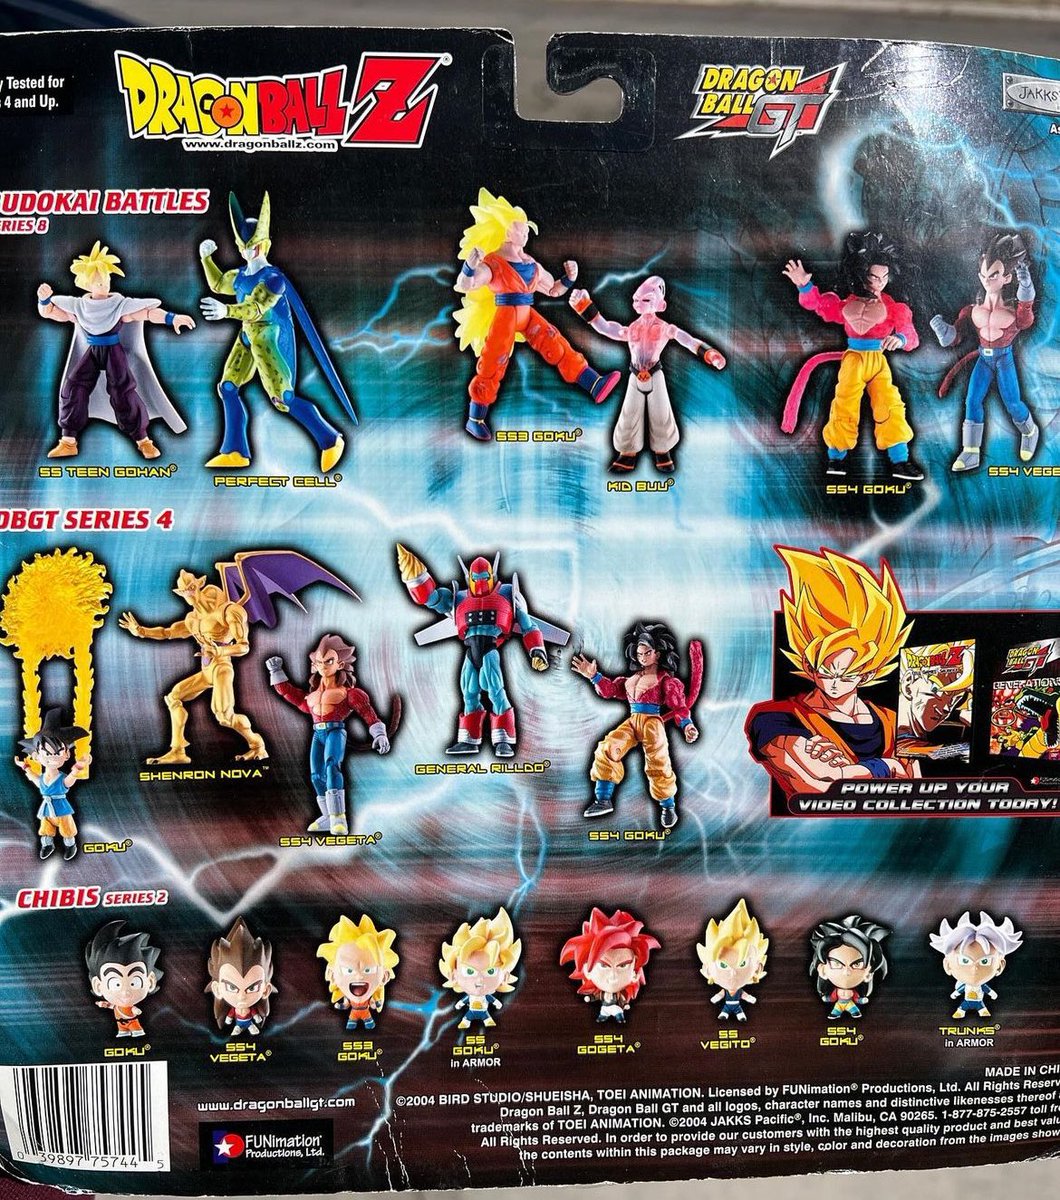 || BUDOKAI 2: SS 3 GOKU VS KID BUU - Jakks Pacific ||

weird how it has a cd with extra footage but theres no version that actually has the game 

still a really release tho